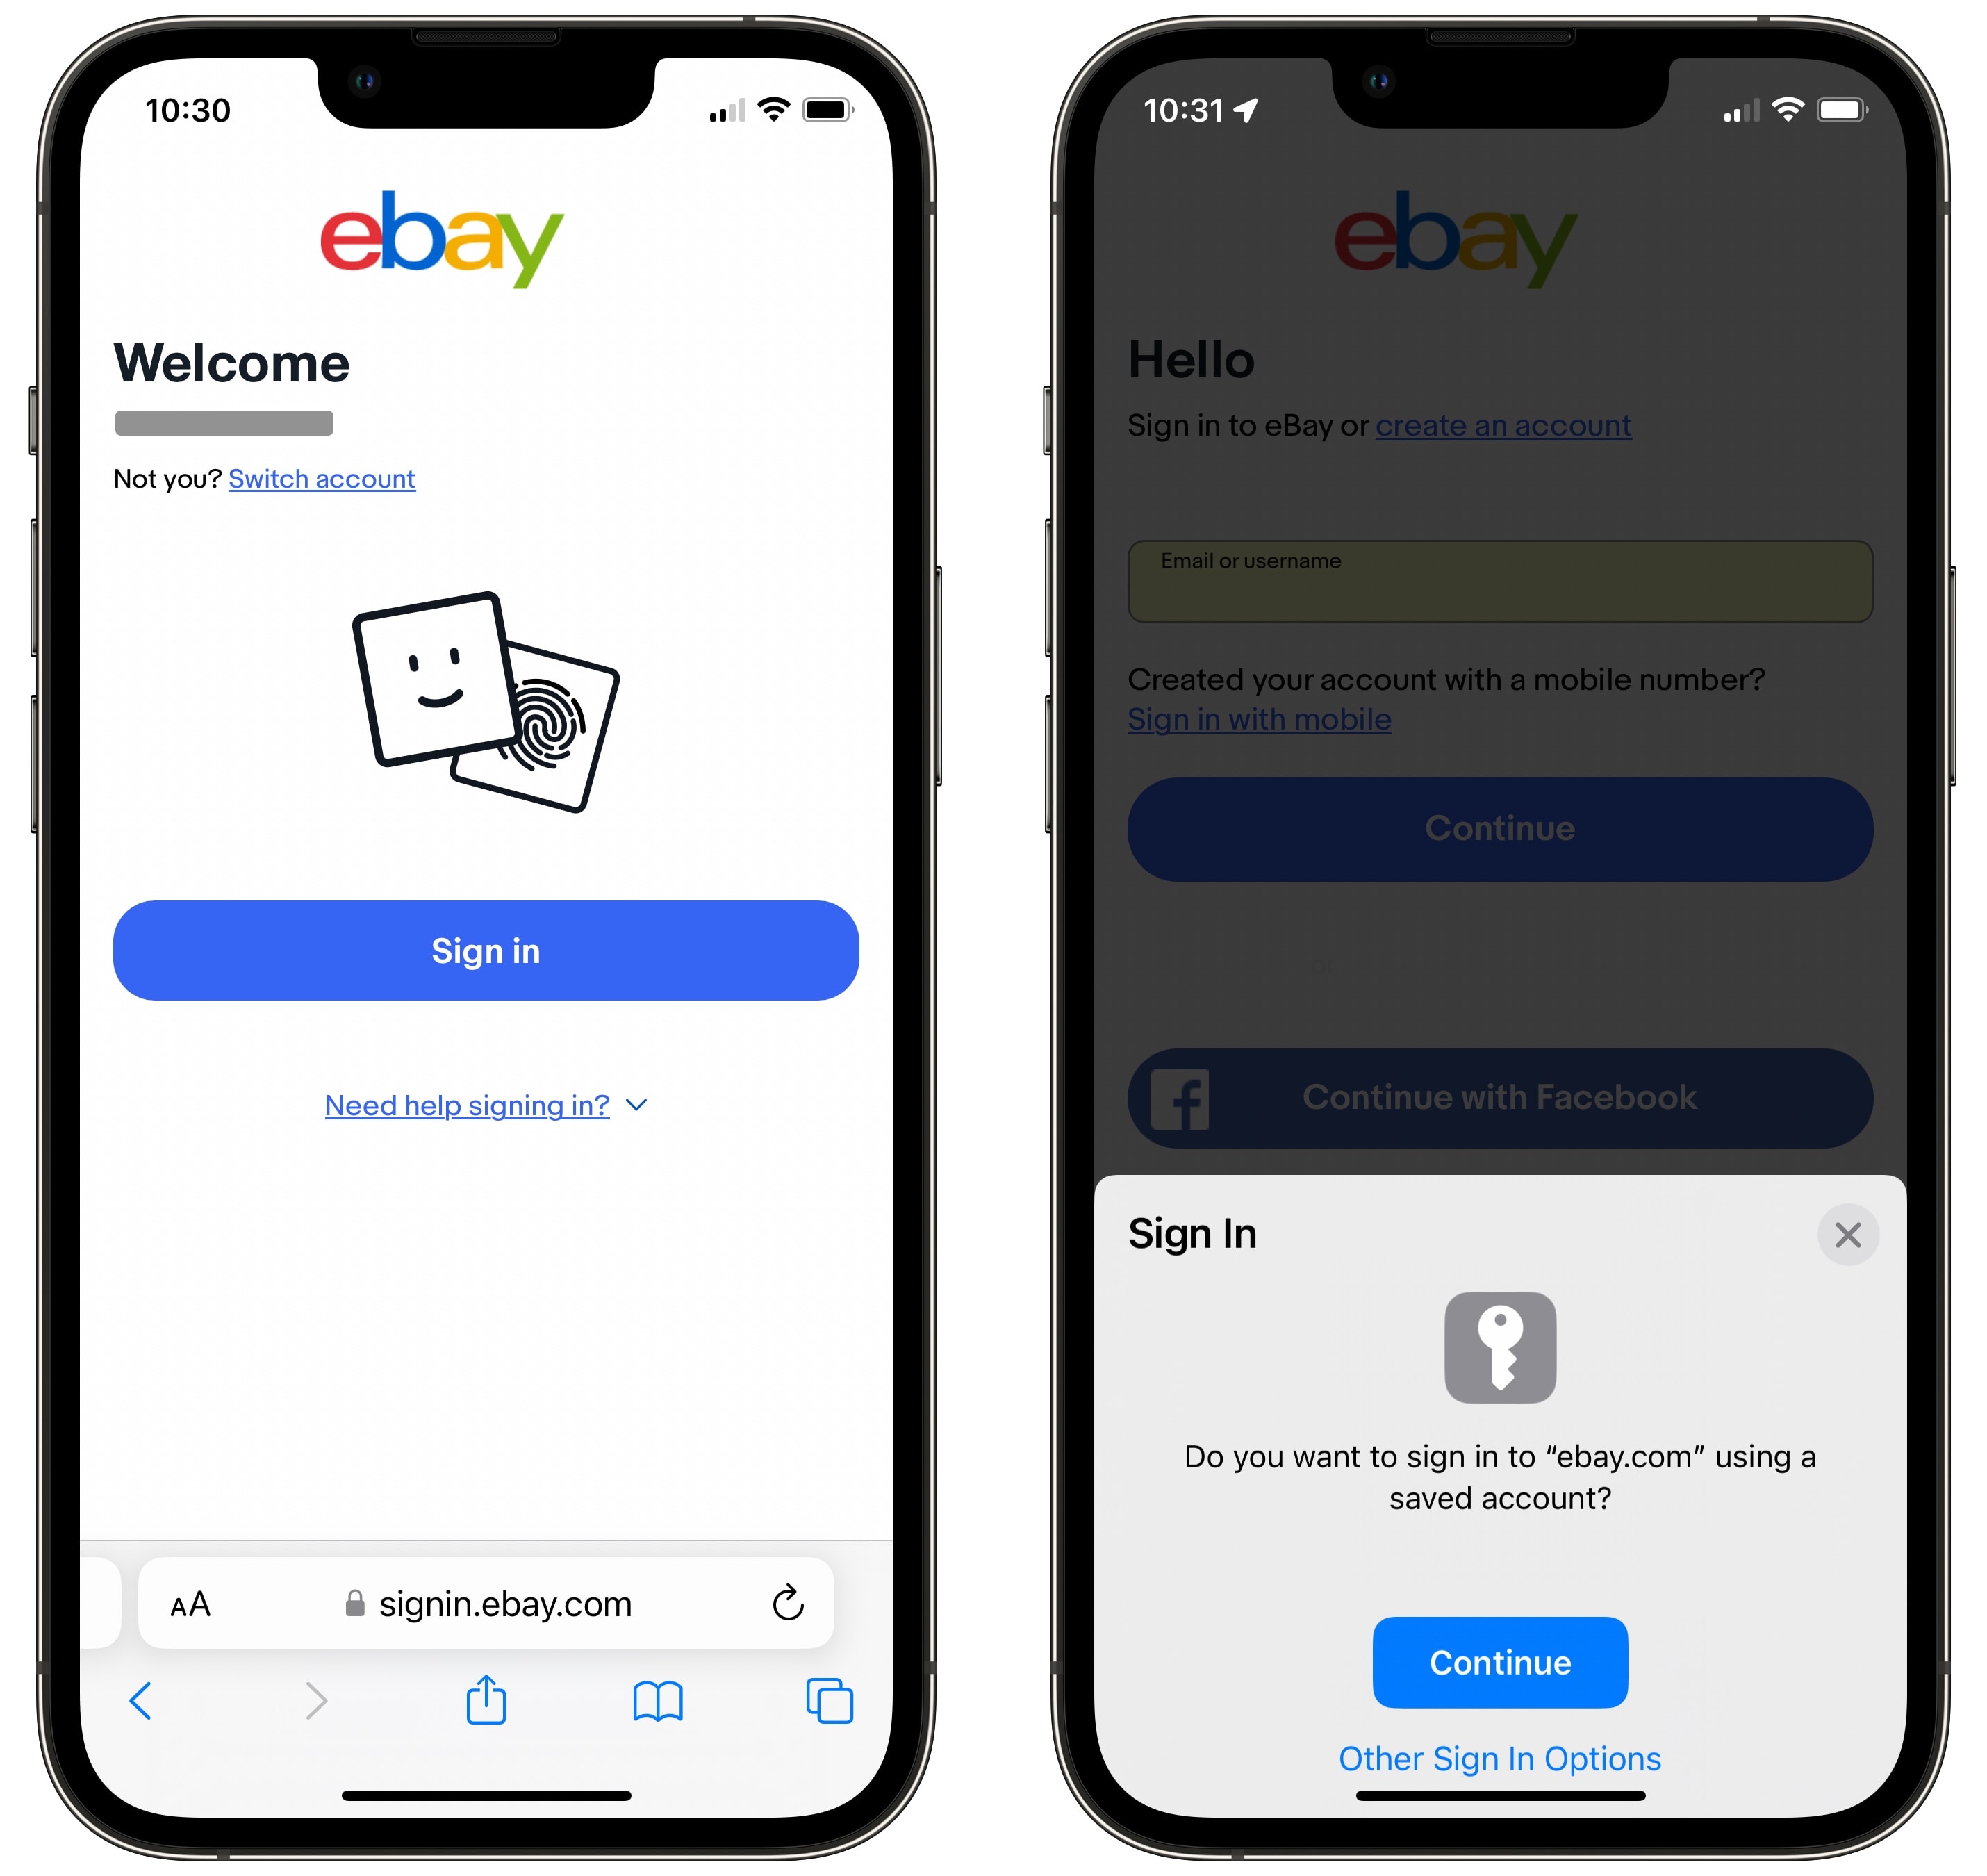 iPhone system popup that says “Do you want to sign in to ‘ebay.com’ using a saved account?” with a “Continue” button